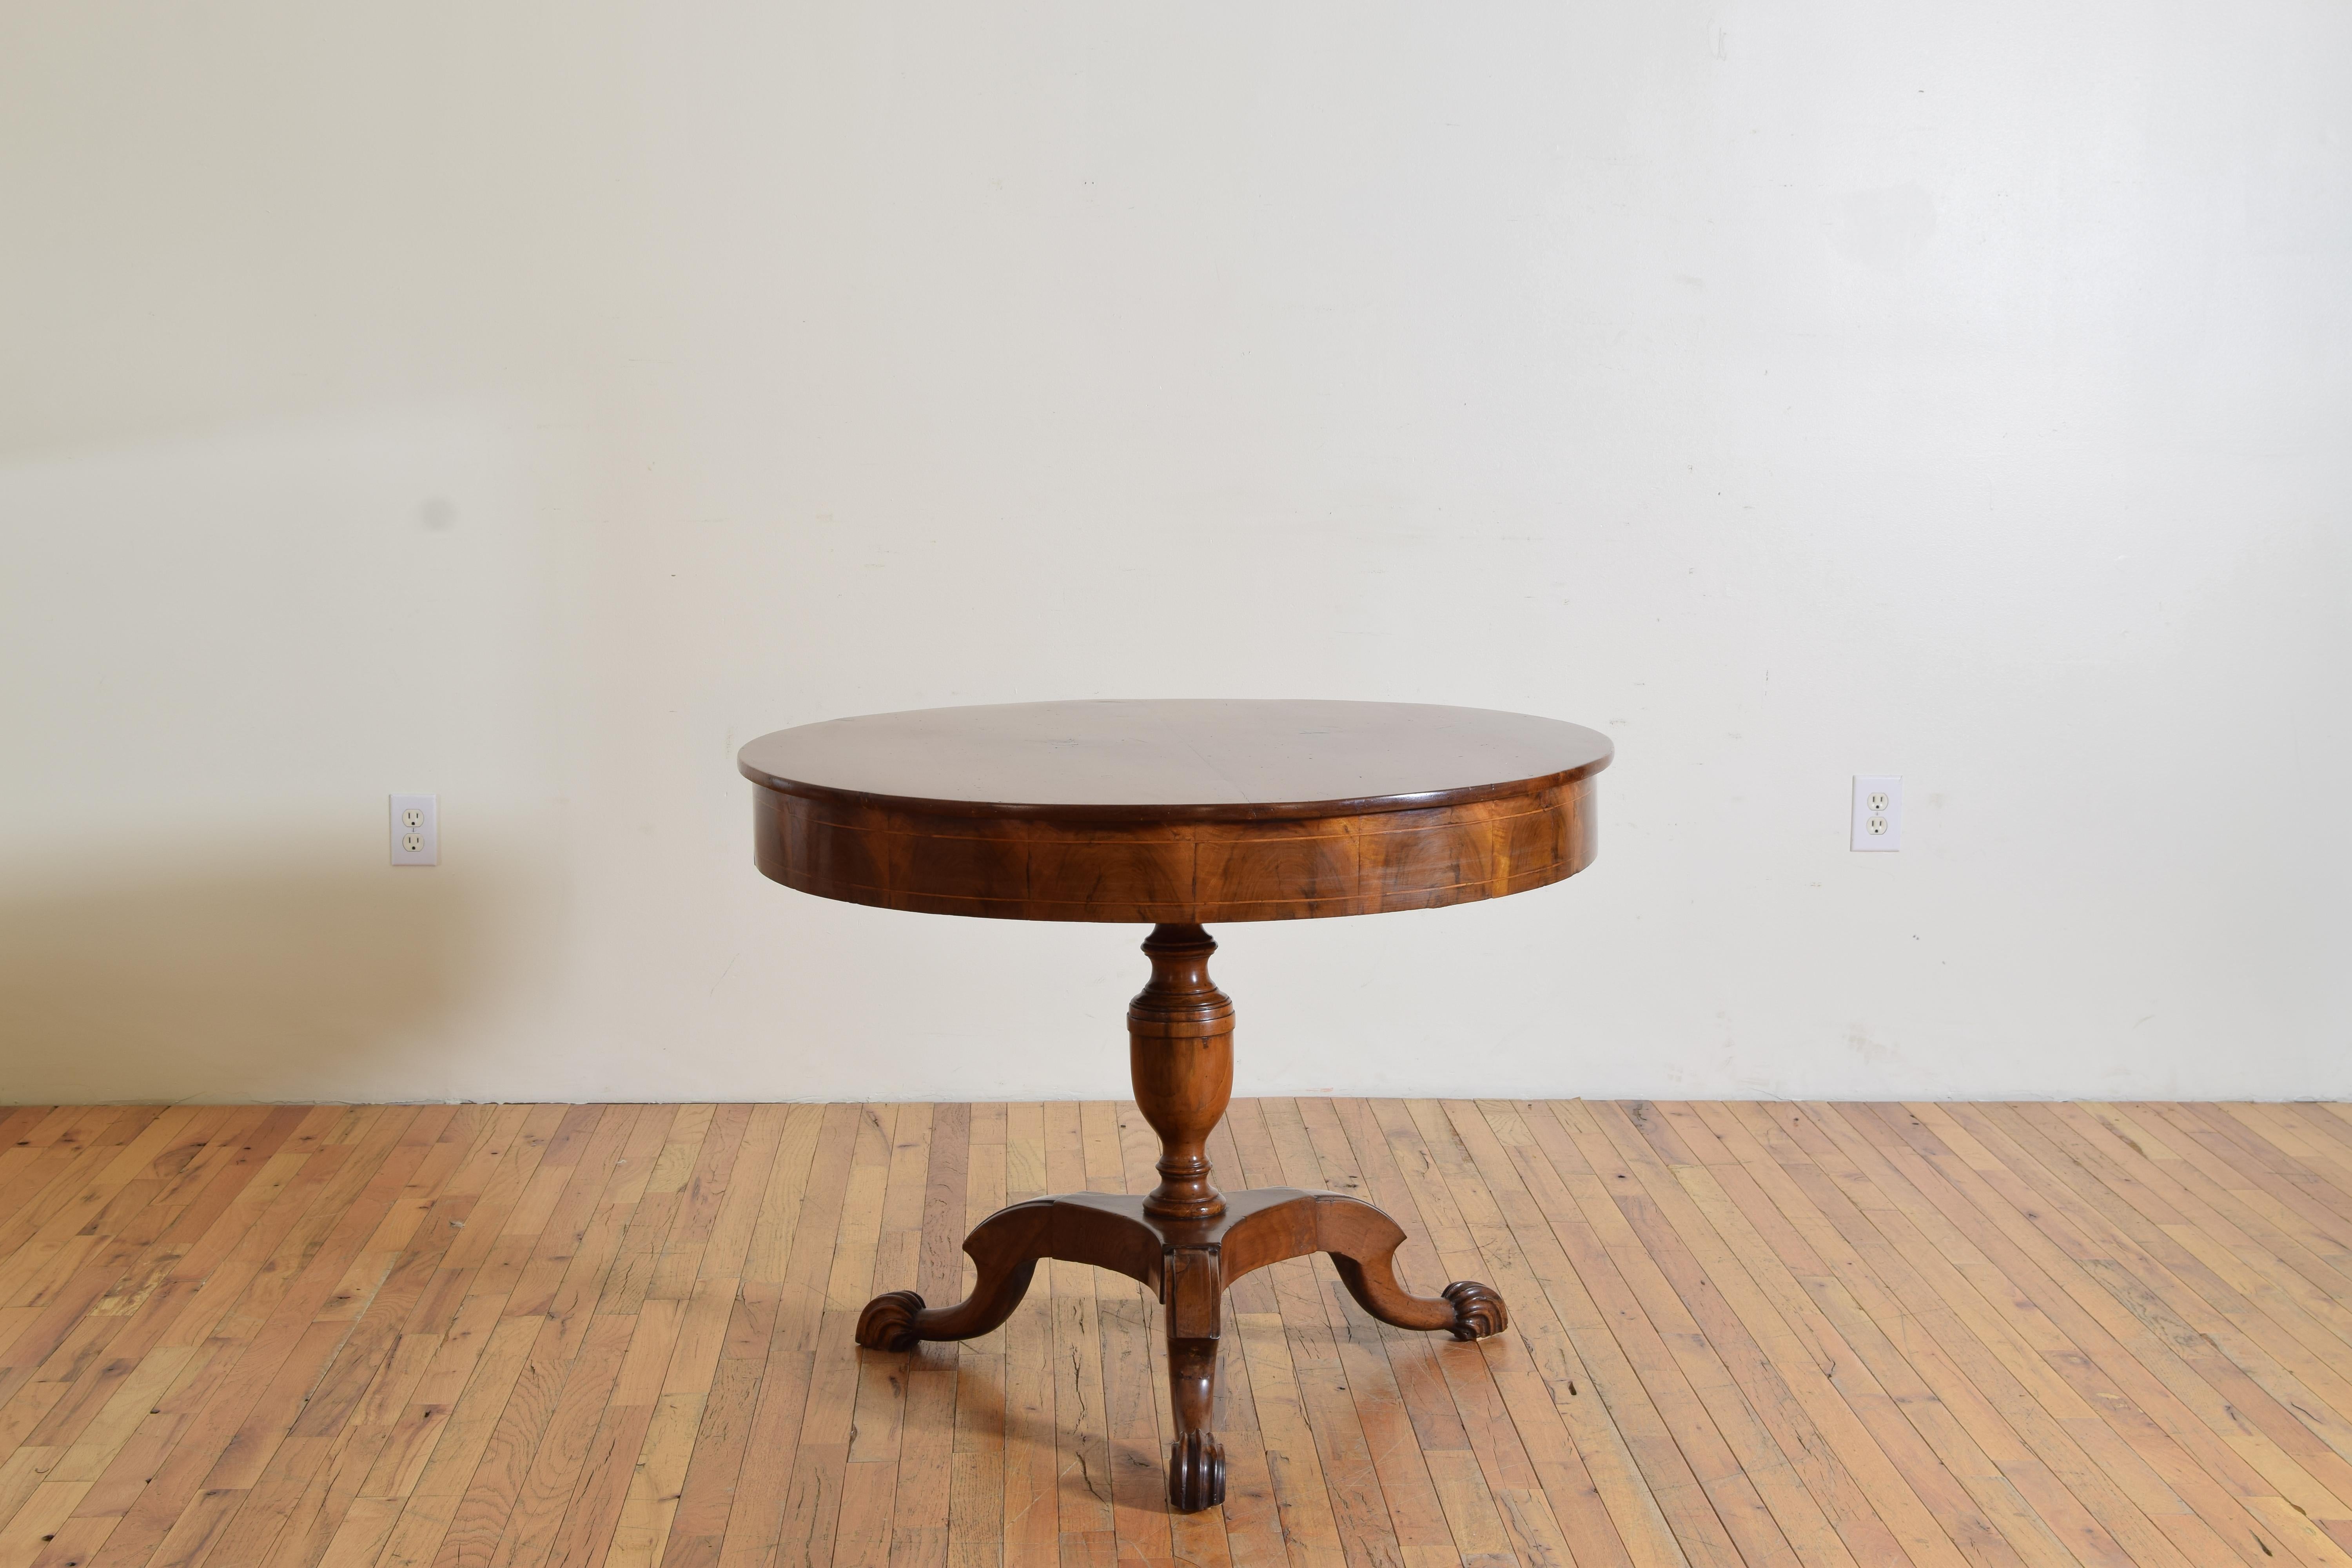 Having a round solid walnut top with an apron veneered in burl walnut with a double band of fruitwood inlay, raised on an urn-form turned standard atop a tripartite base issuing three shaped and expertly carved legs with shell carved feet